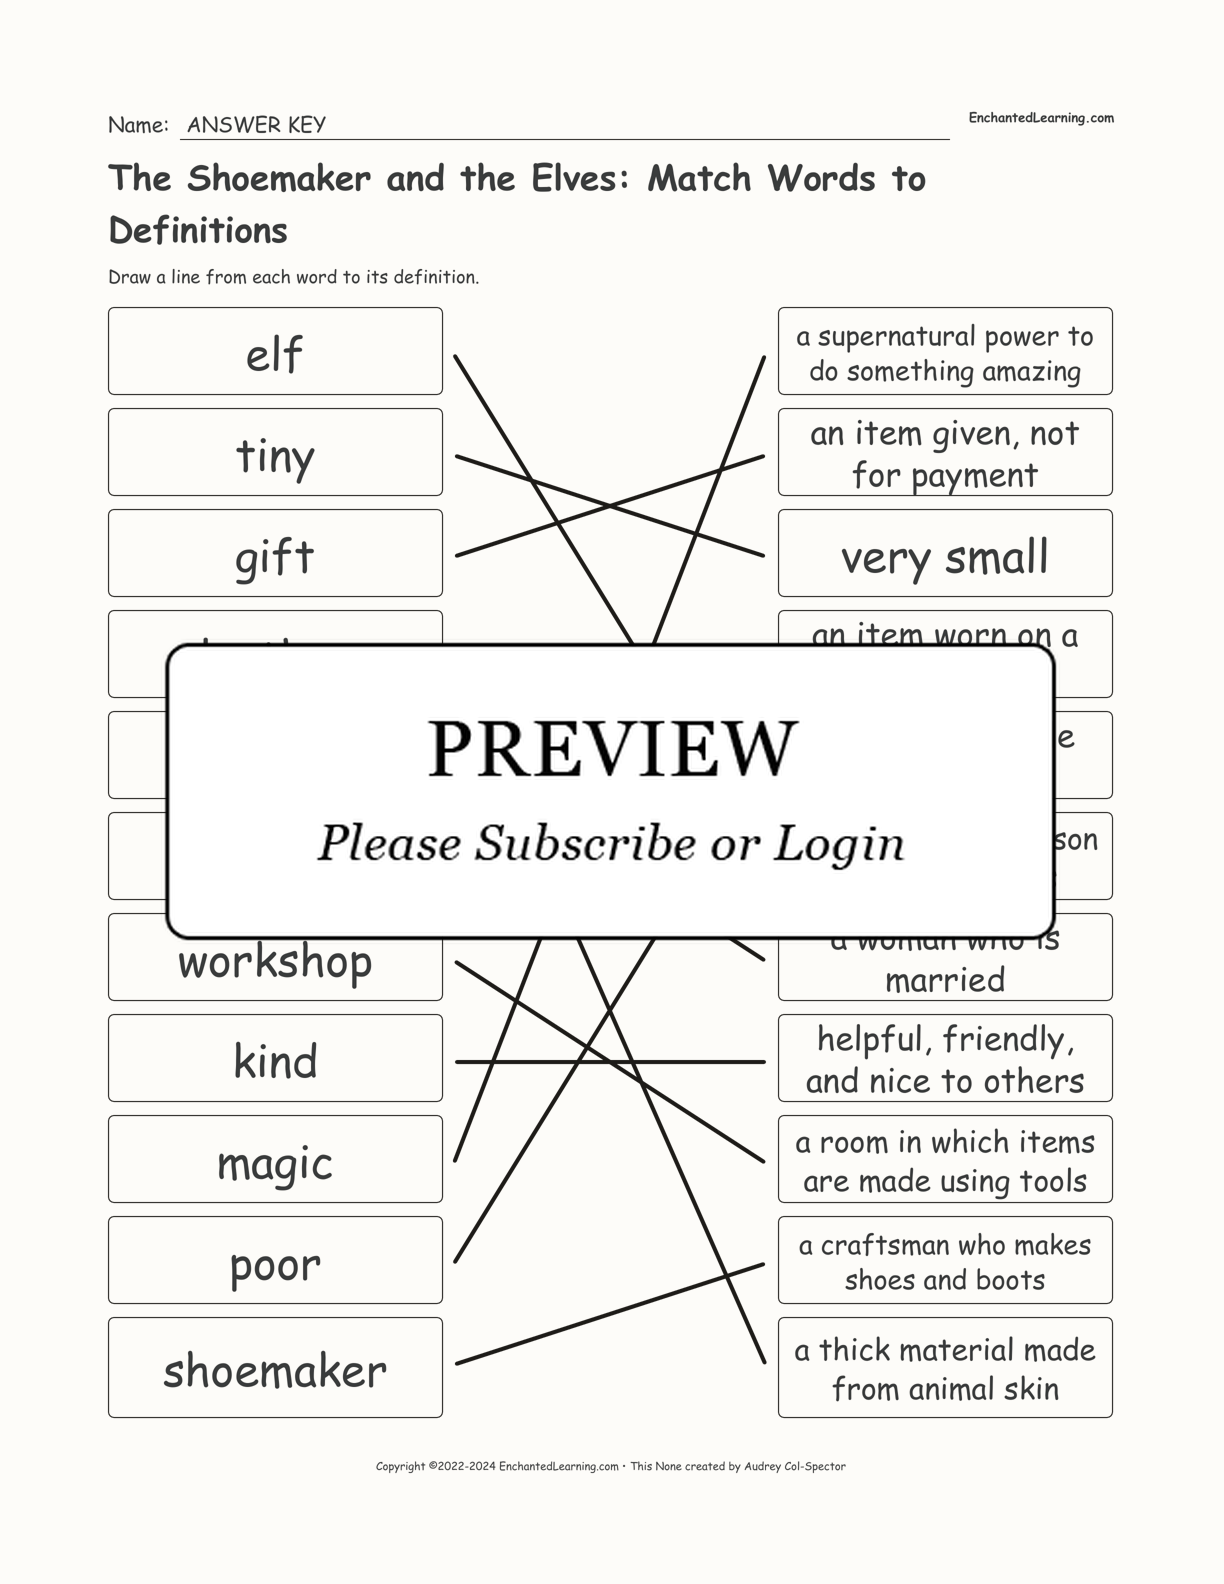 The Shoemaker and the Elves: Match Words to Definitions interactive worksheet page 2